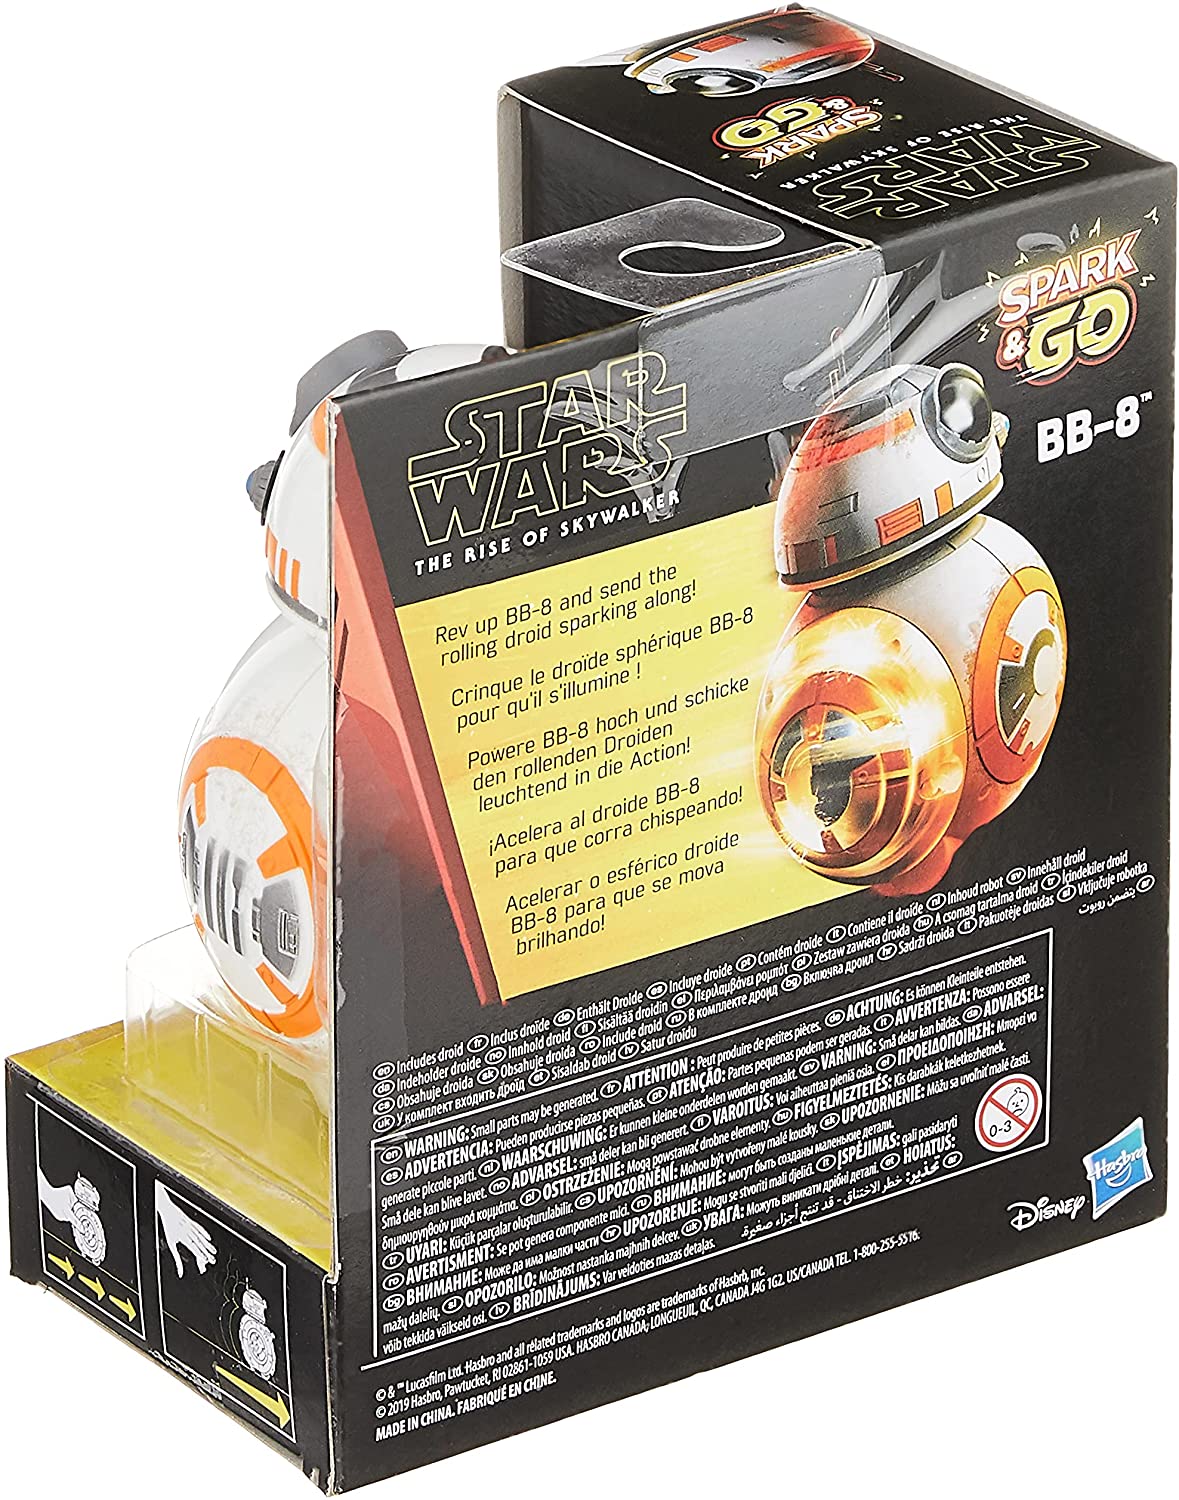 Star Wars Spark Go Bb 8 Rolling Astromech Droid The Rise Of Skywalker Rev Go Sparking Toy Toy 3626